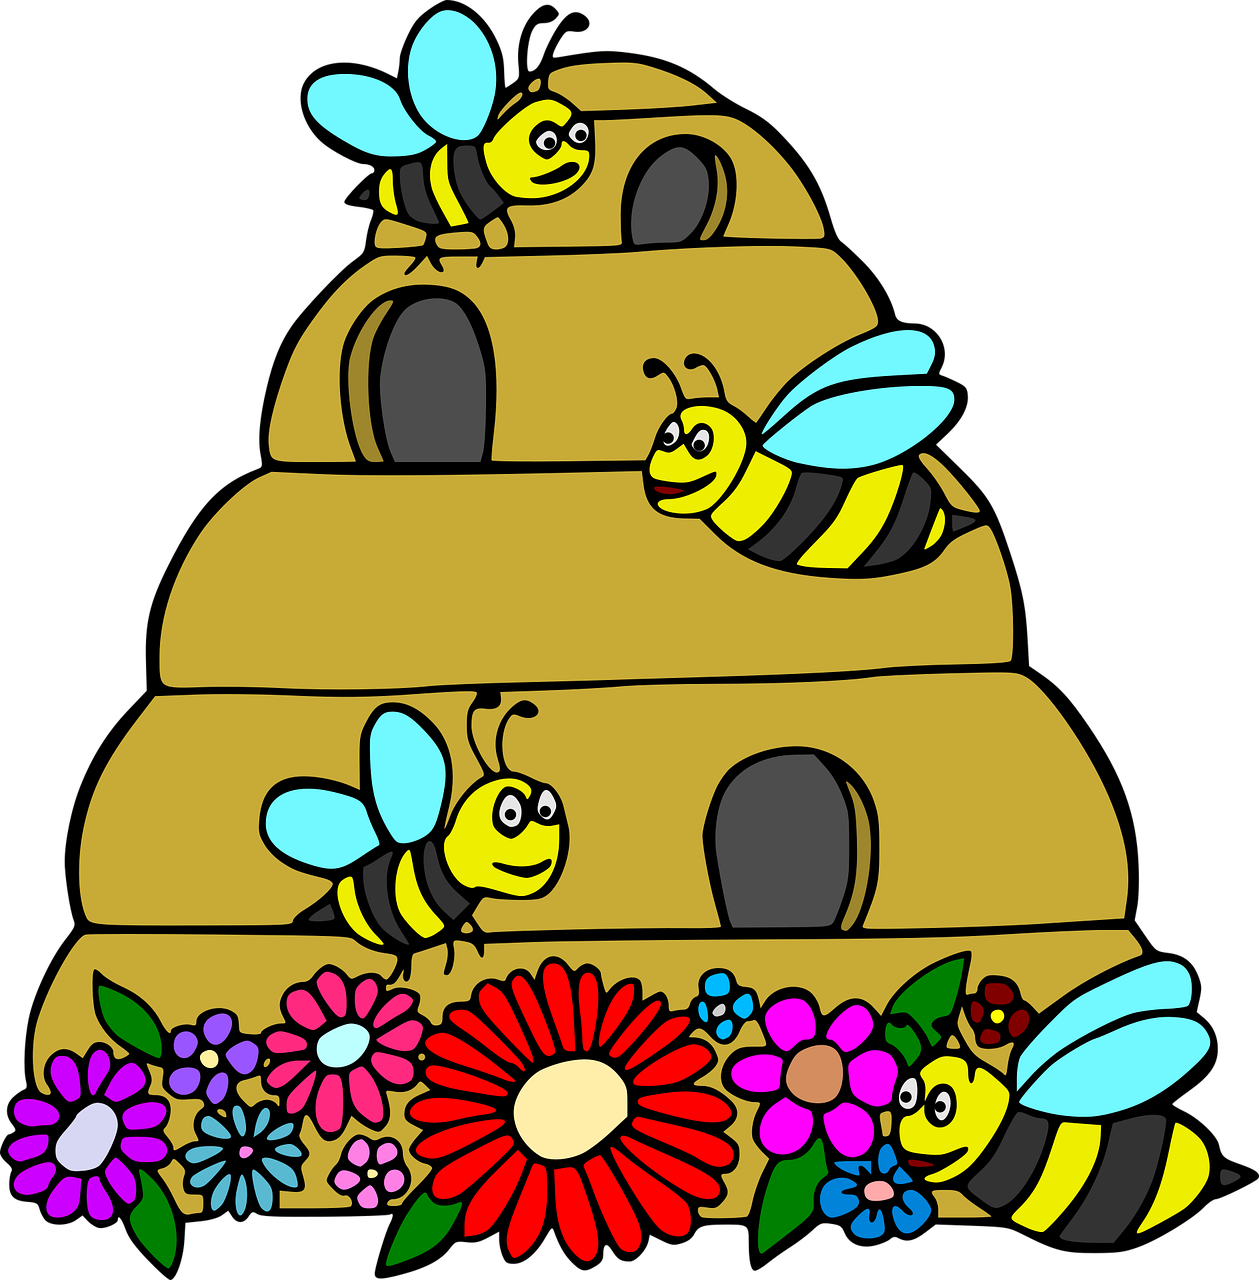 a bunch of bees flying around a beehive, a digital rendering, by Melissa A. Benson, naive art, on black background, 2 0 1 0 photo, coloring pages, stacked image